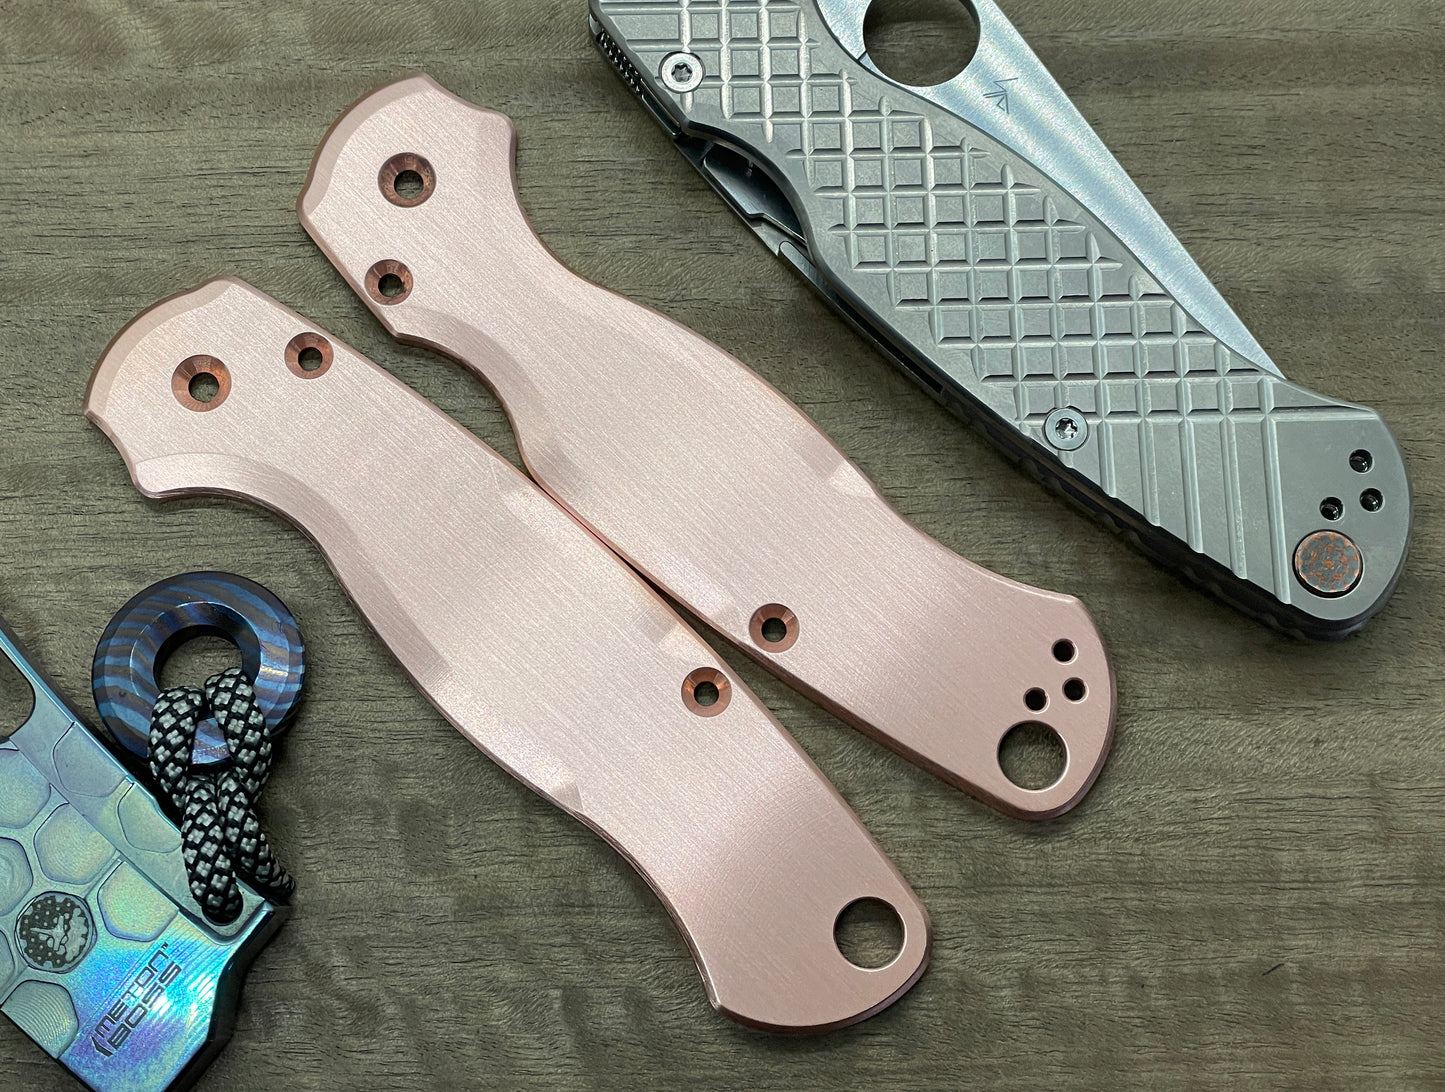 BRUSHED Copper Scales for Spyderco Para 3